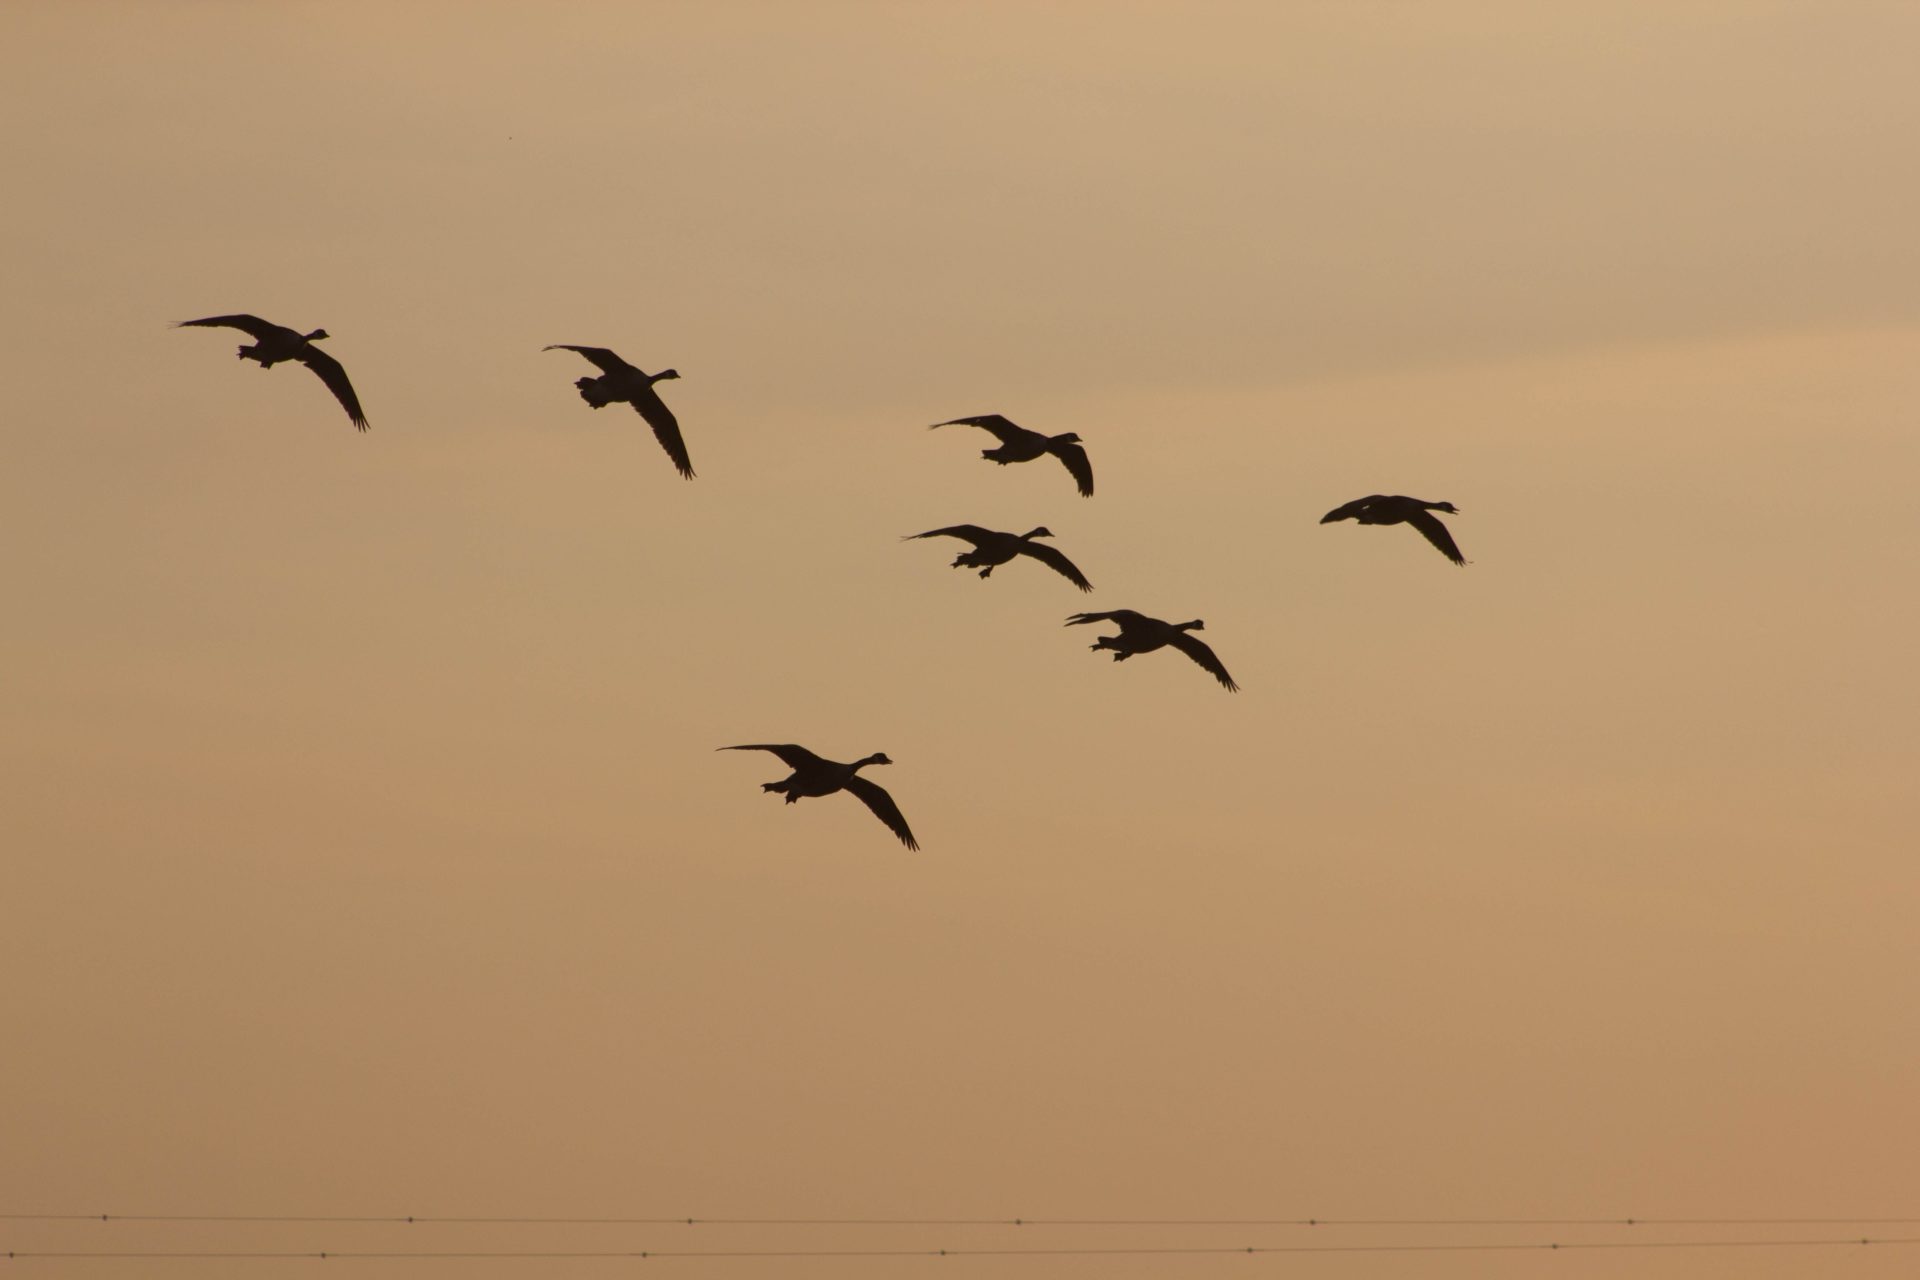 Geese flying in formation in a cloudy evening sky.